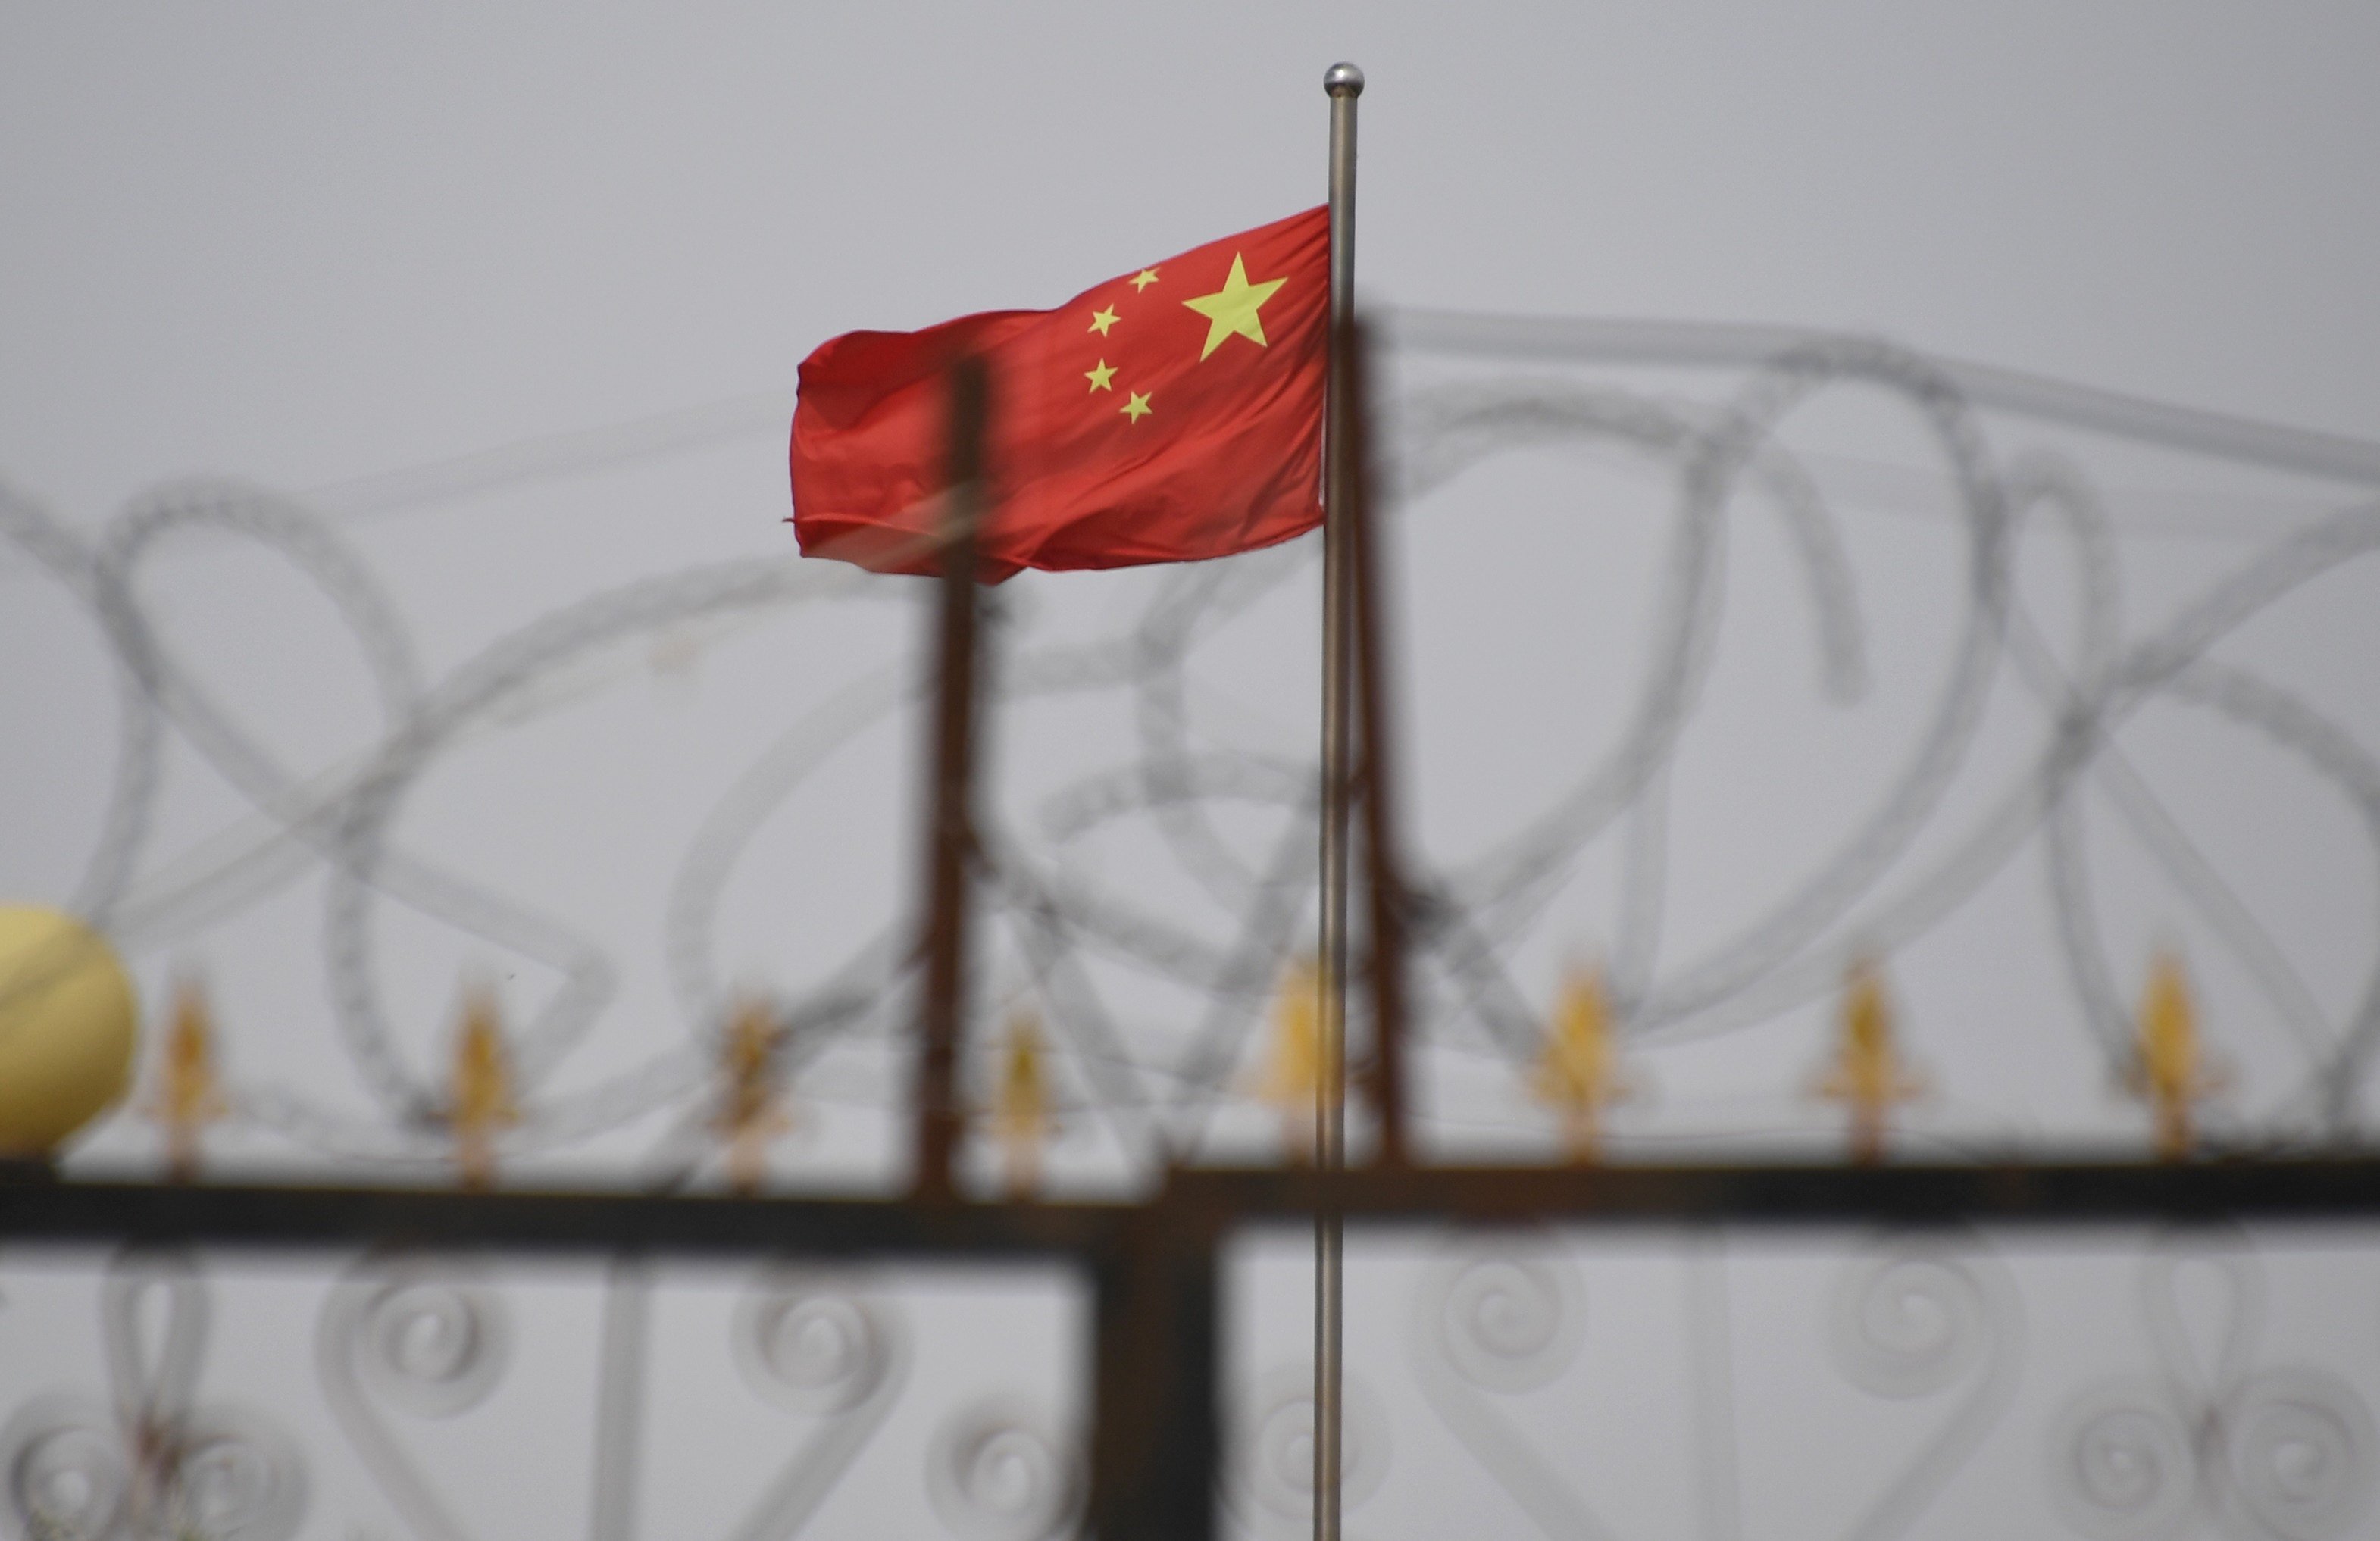 The Chinese flag is seen behind razor wire at a housing compound in Yangisar in China’s Xinjiang Uygur autonomous region in June 2019. Photo: AFP